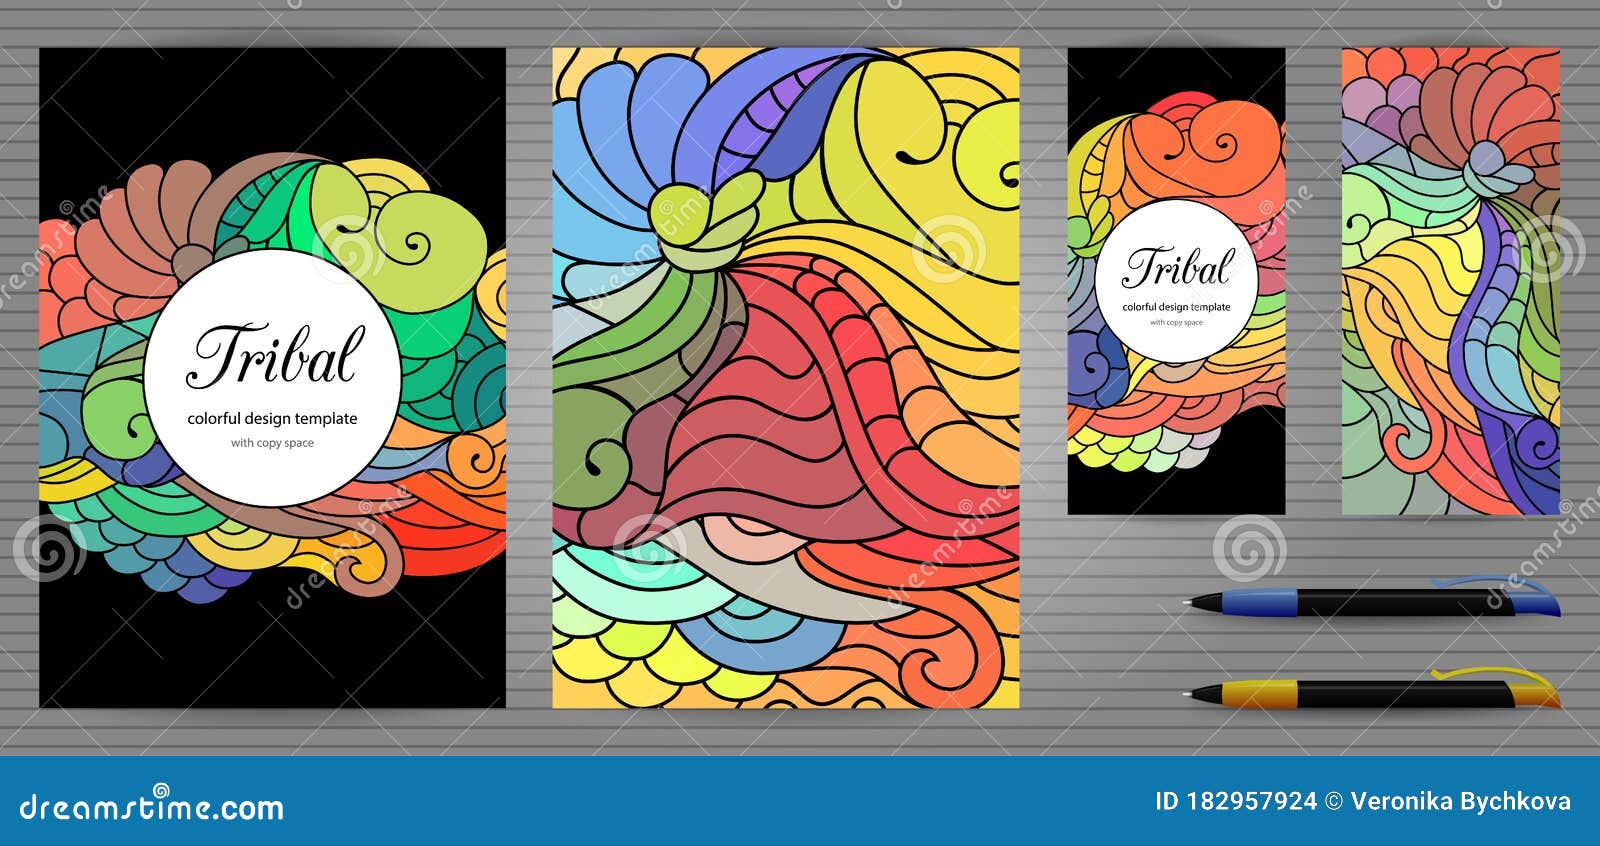 Download Doodles Corporate Identity And Stationery Templates Set Colorful Zentangle Graphic Design Mockups Including Document Flyer Stock Illustration Illustration Of Oriental Annual 182957924